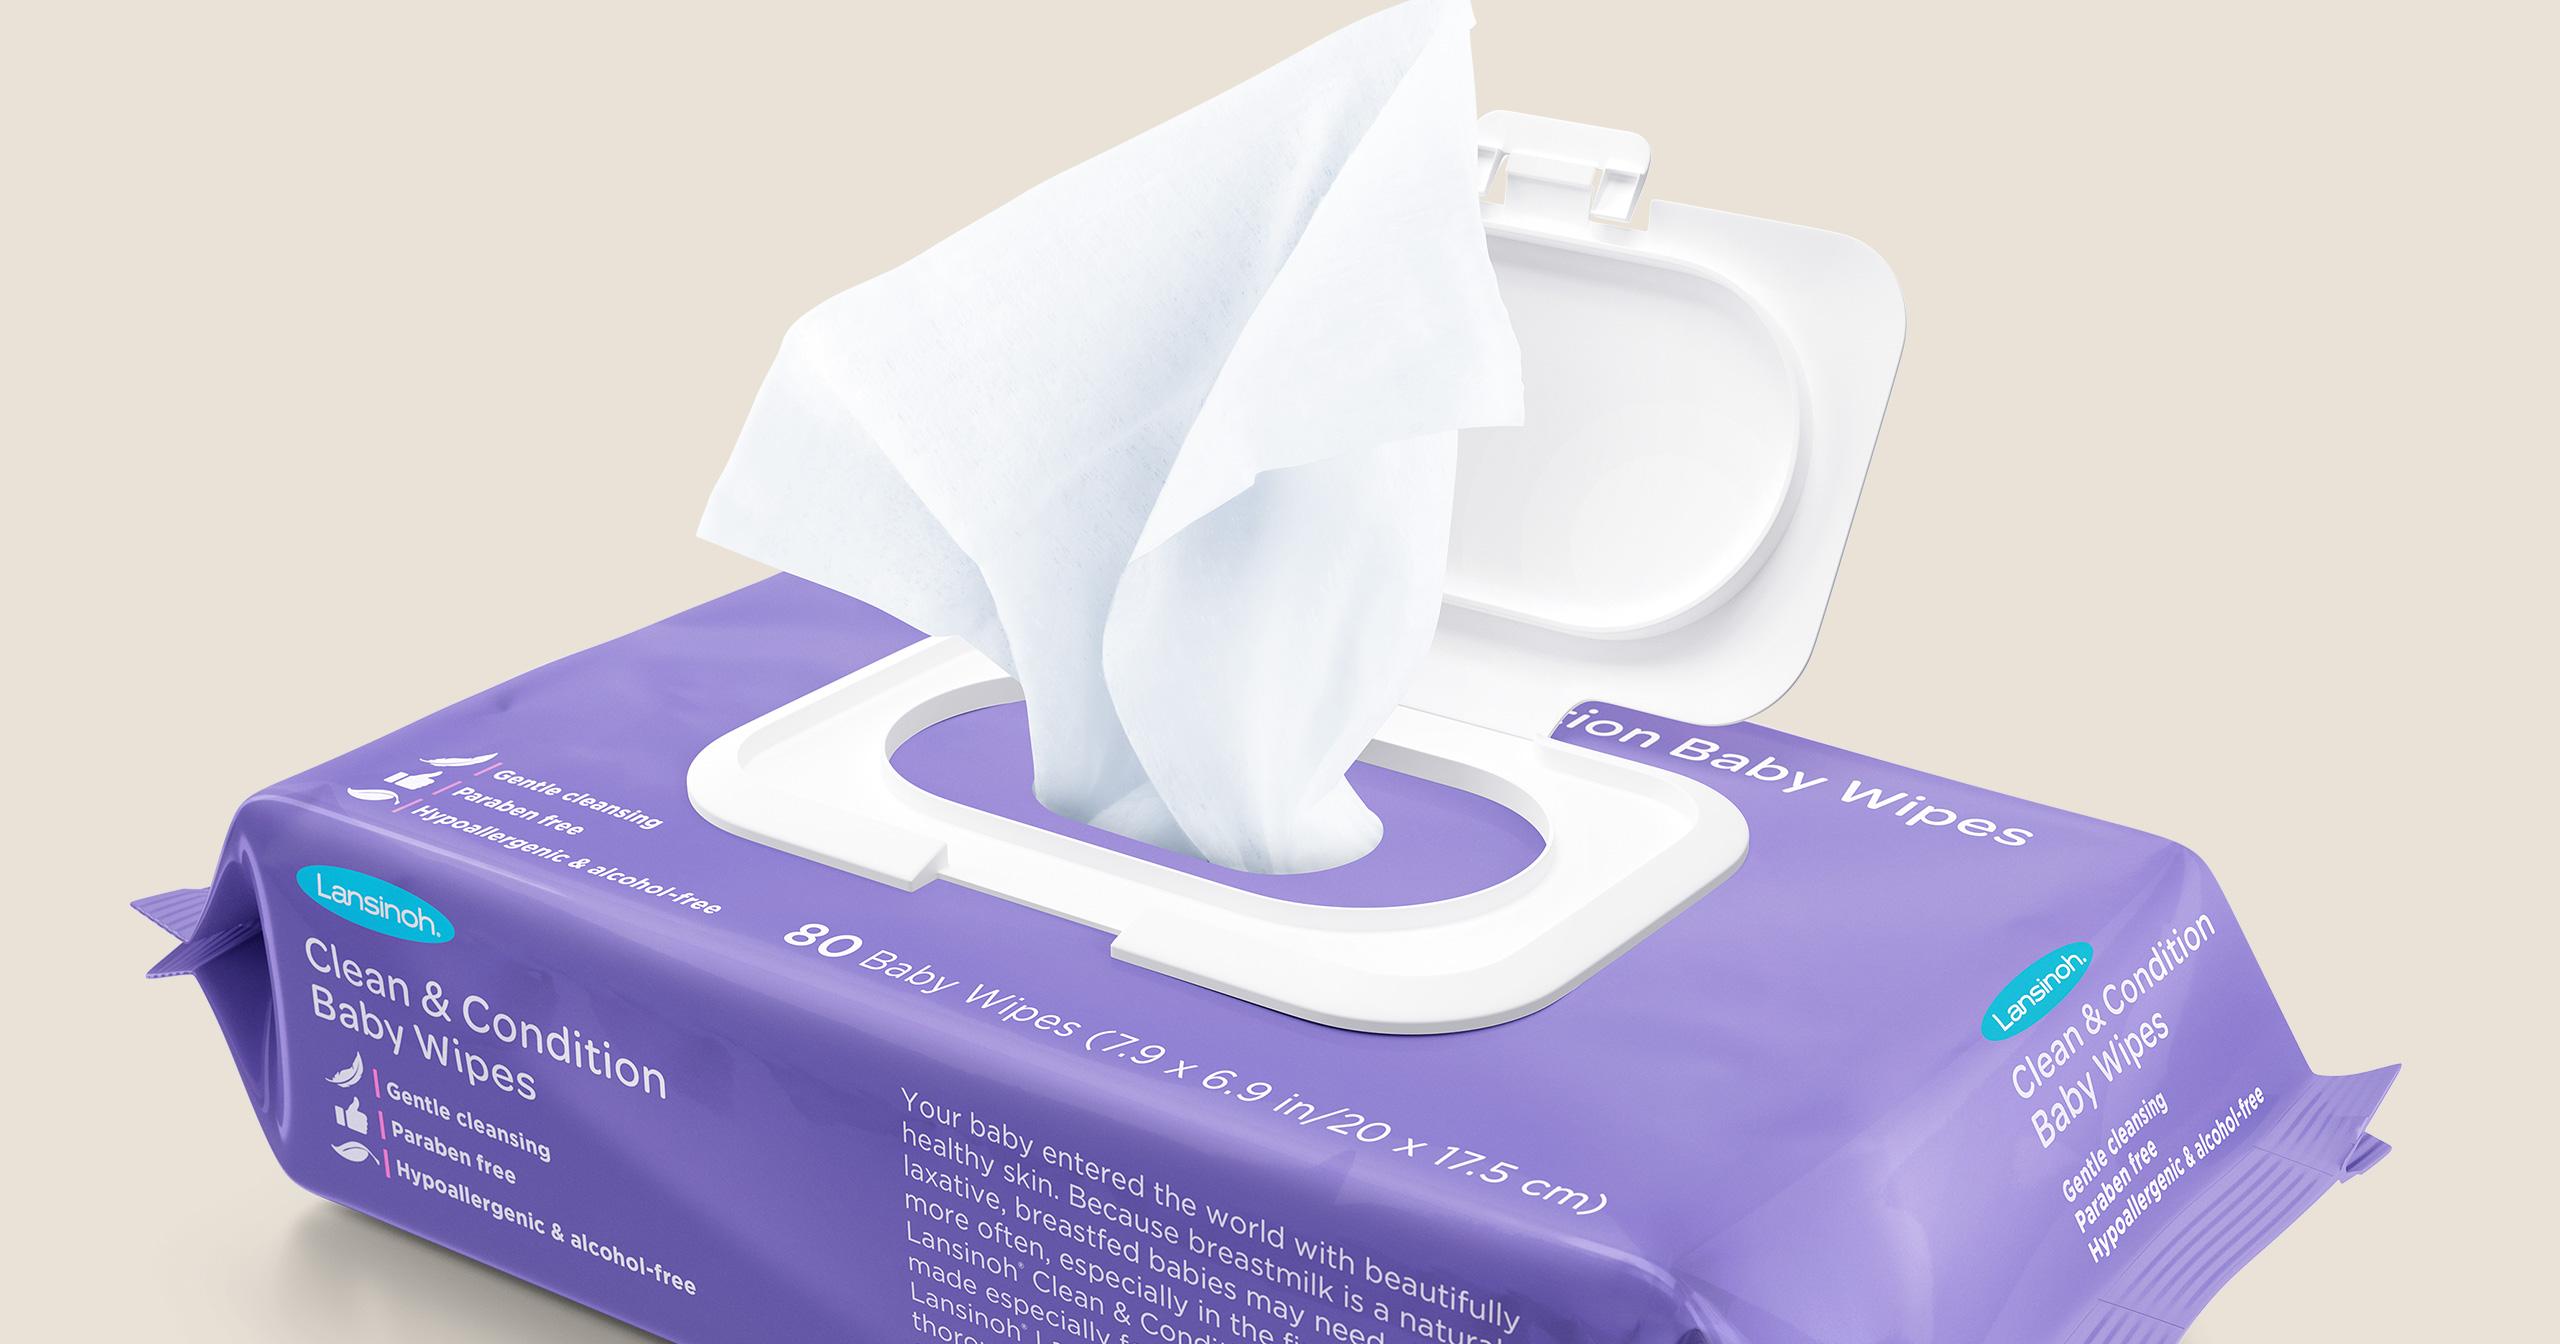 3D product visualisation for Lansinoh wet wipes - content creation by Vibe Studio